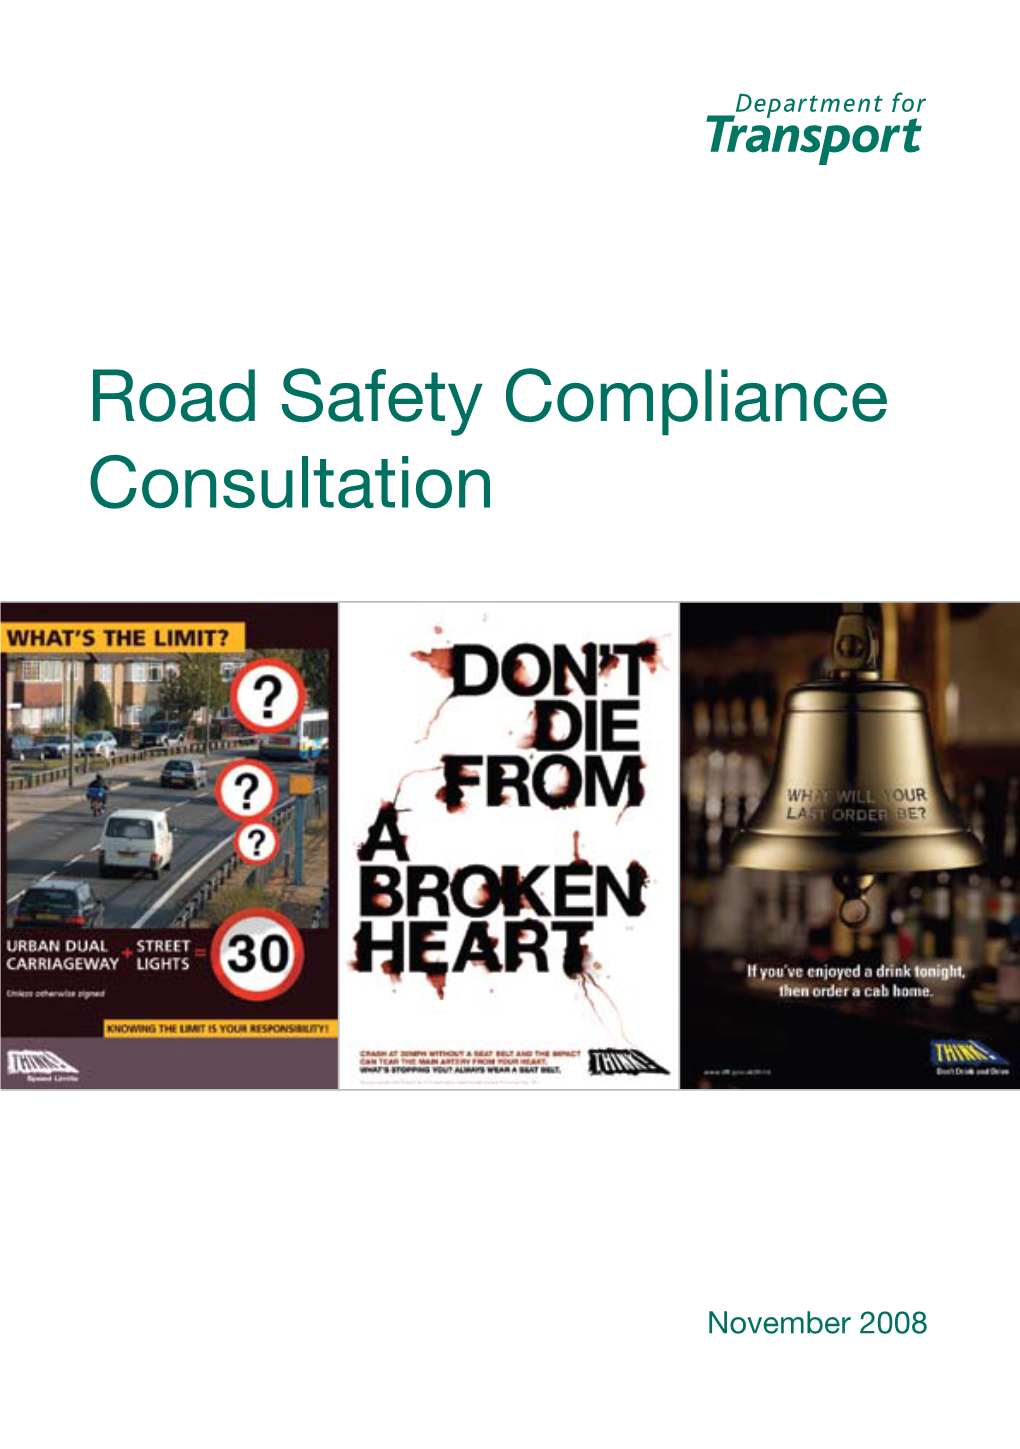 Road Safety Compliance Consultation